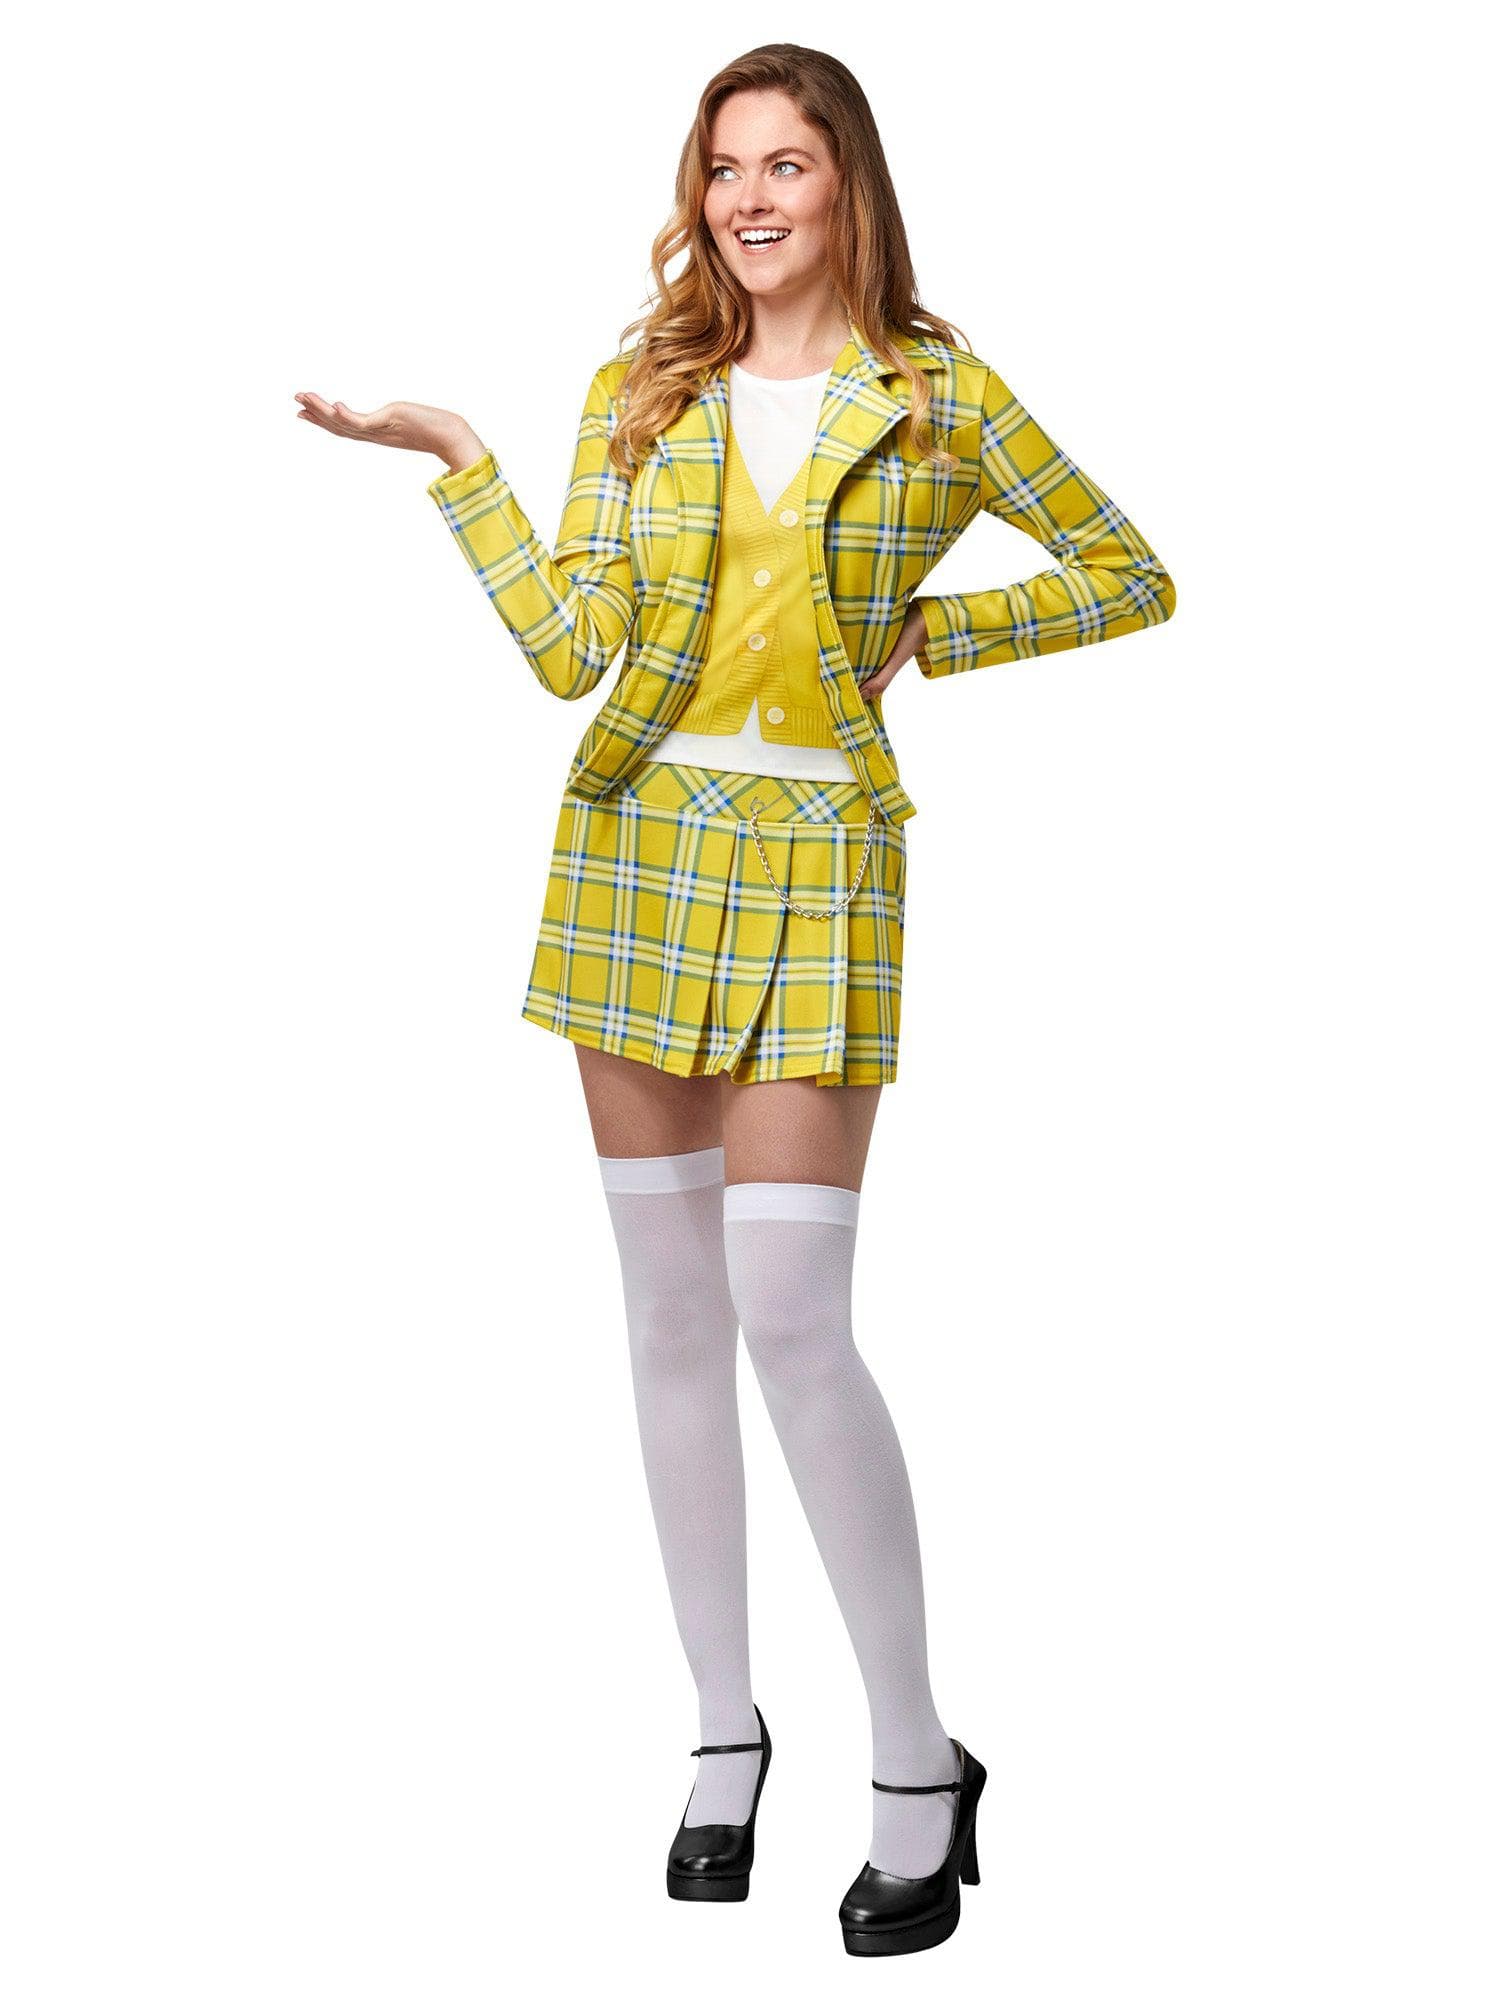 Clueless Cher Adult Costume - costumes.com